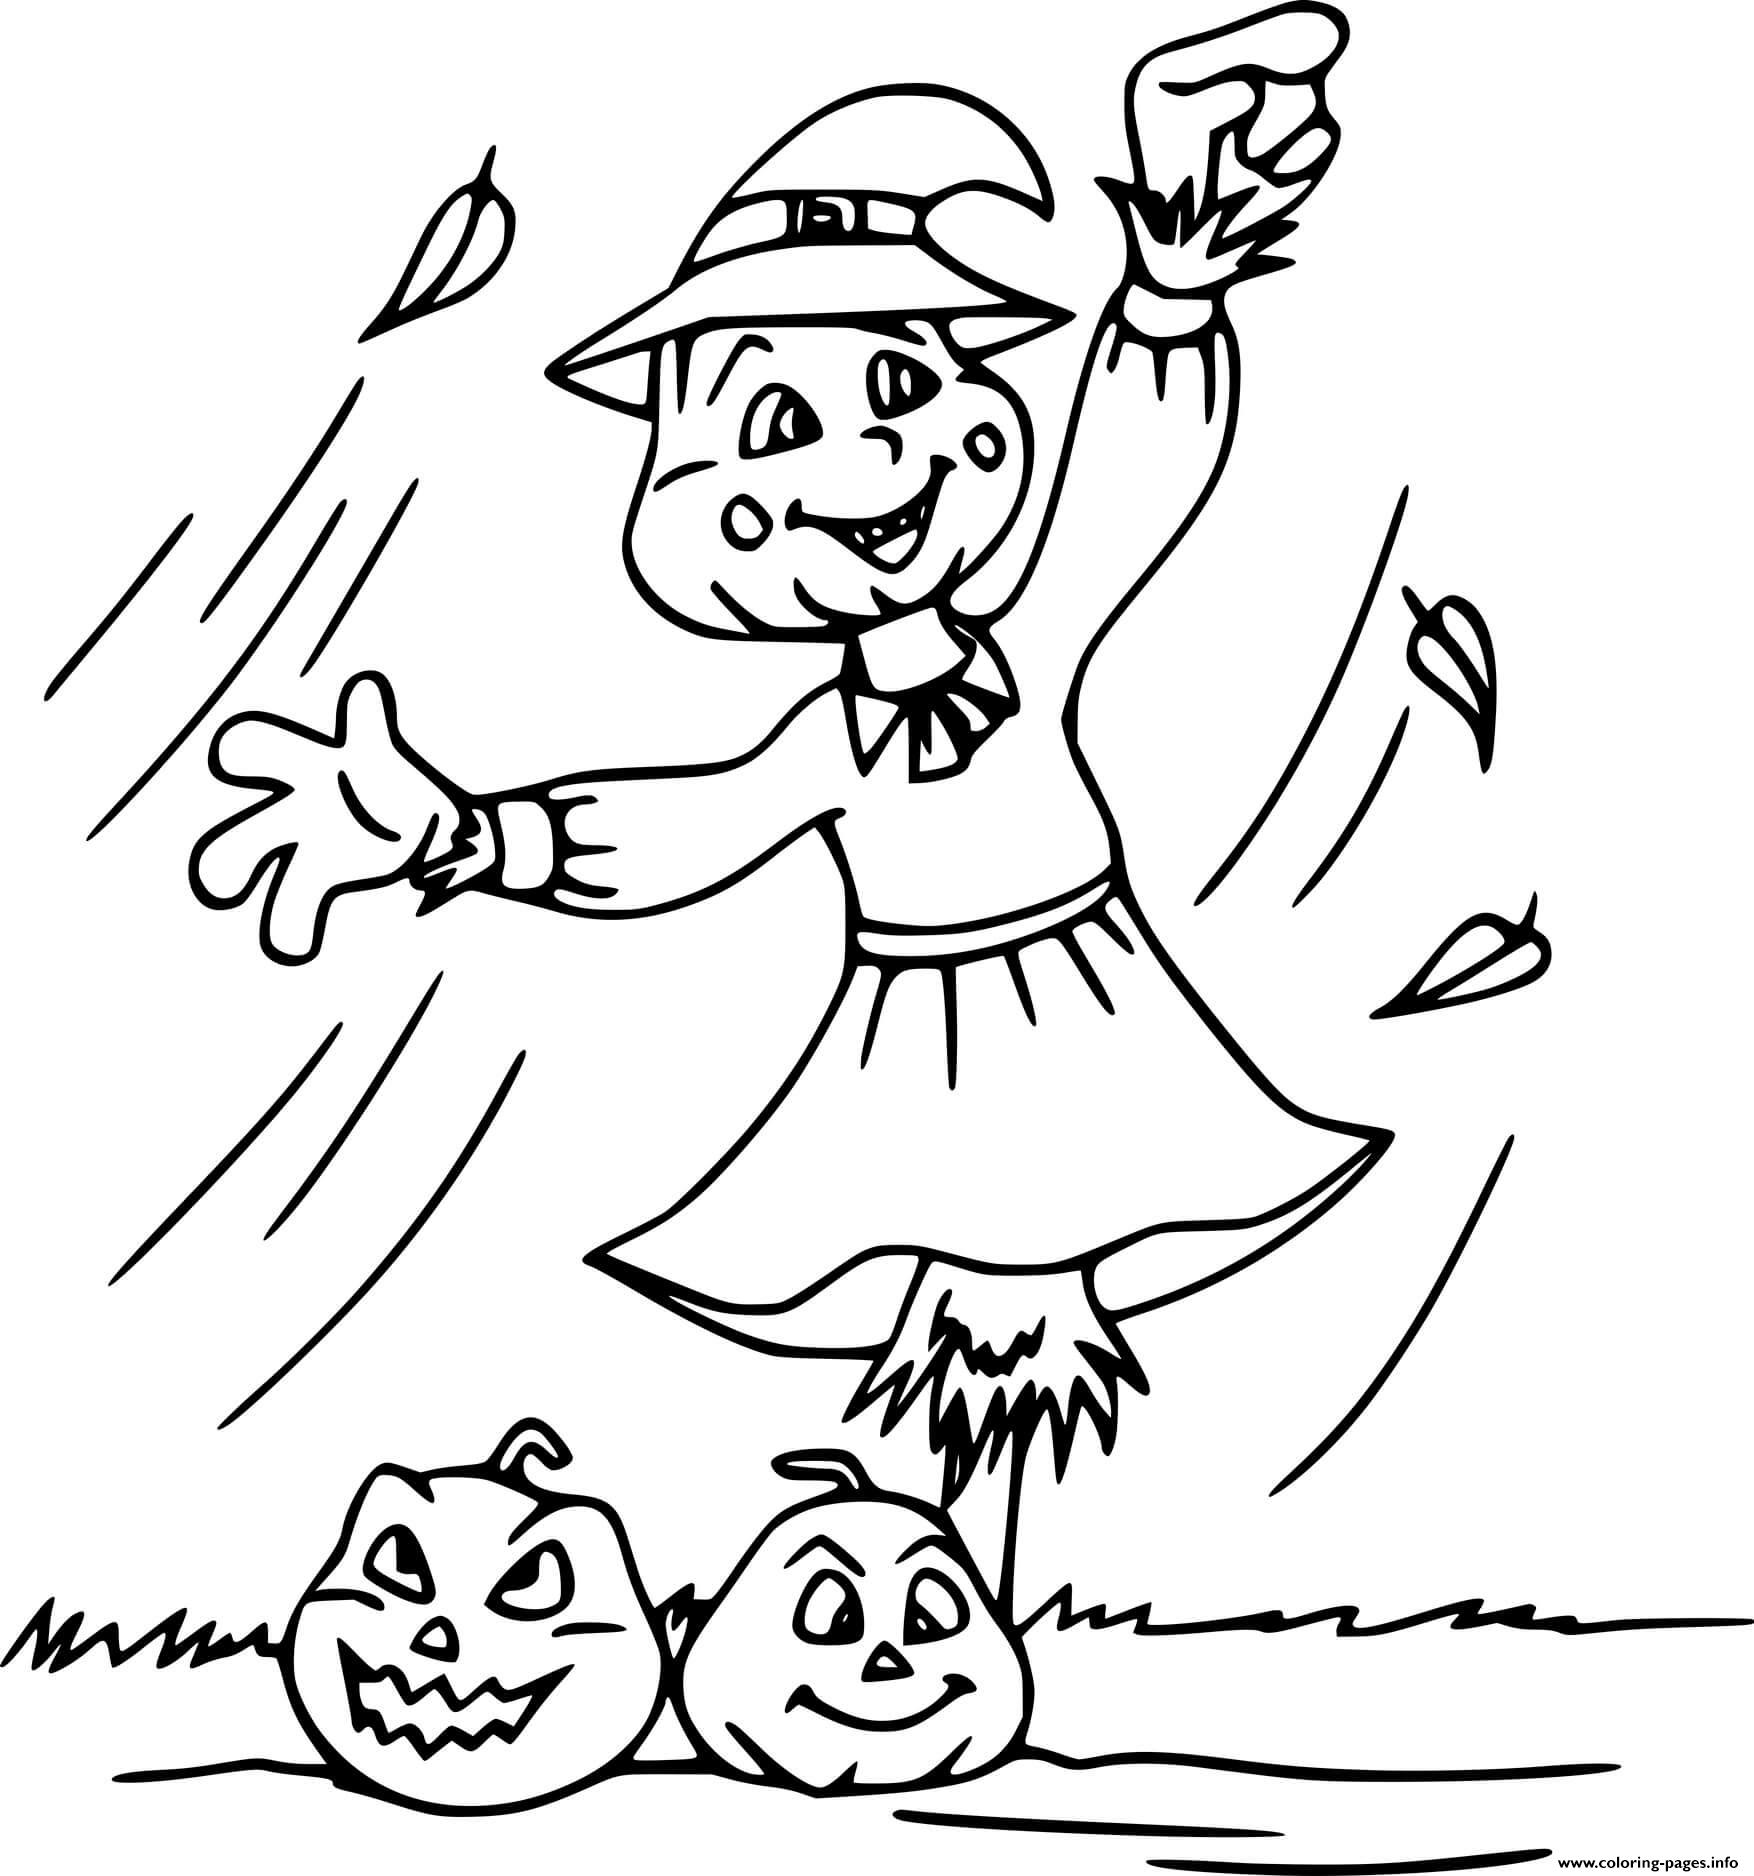 Scarecrow With Jack O Lanterns coloring